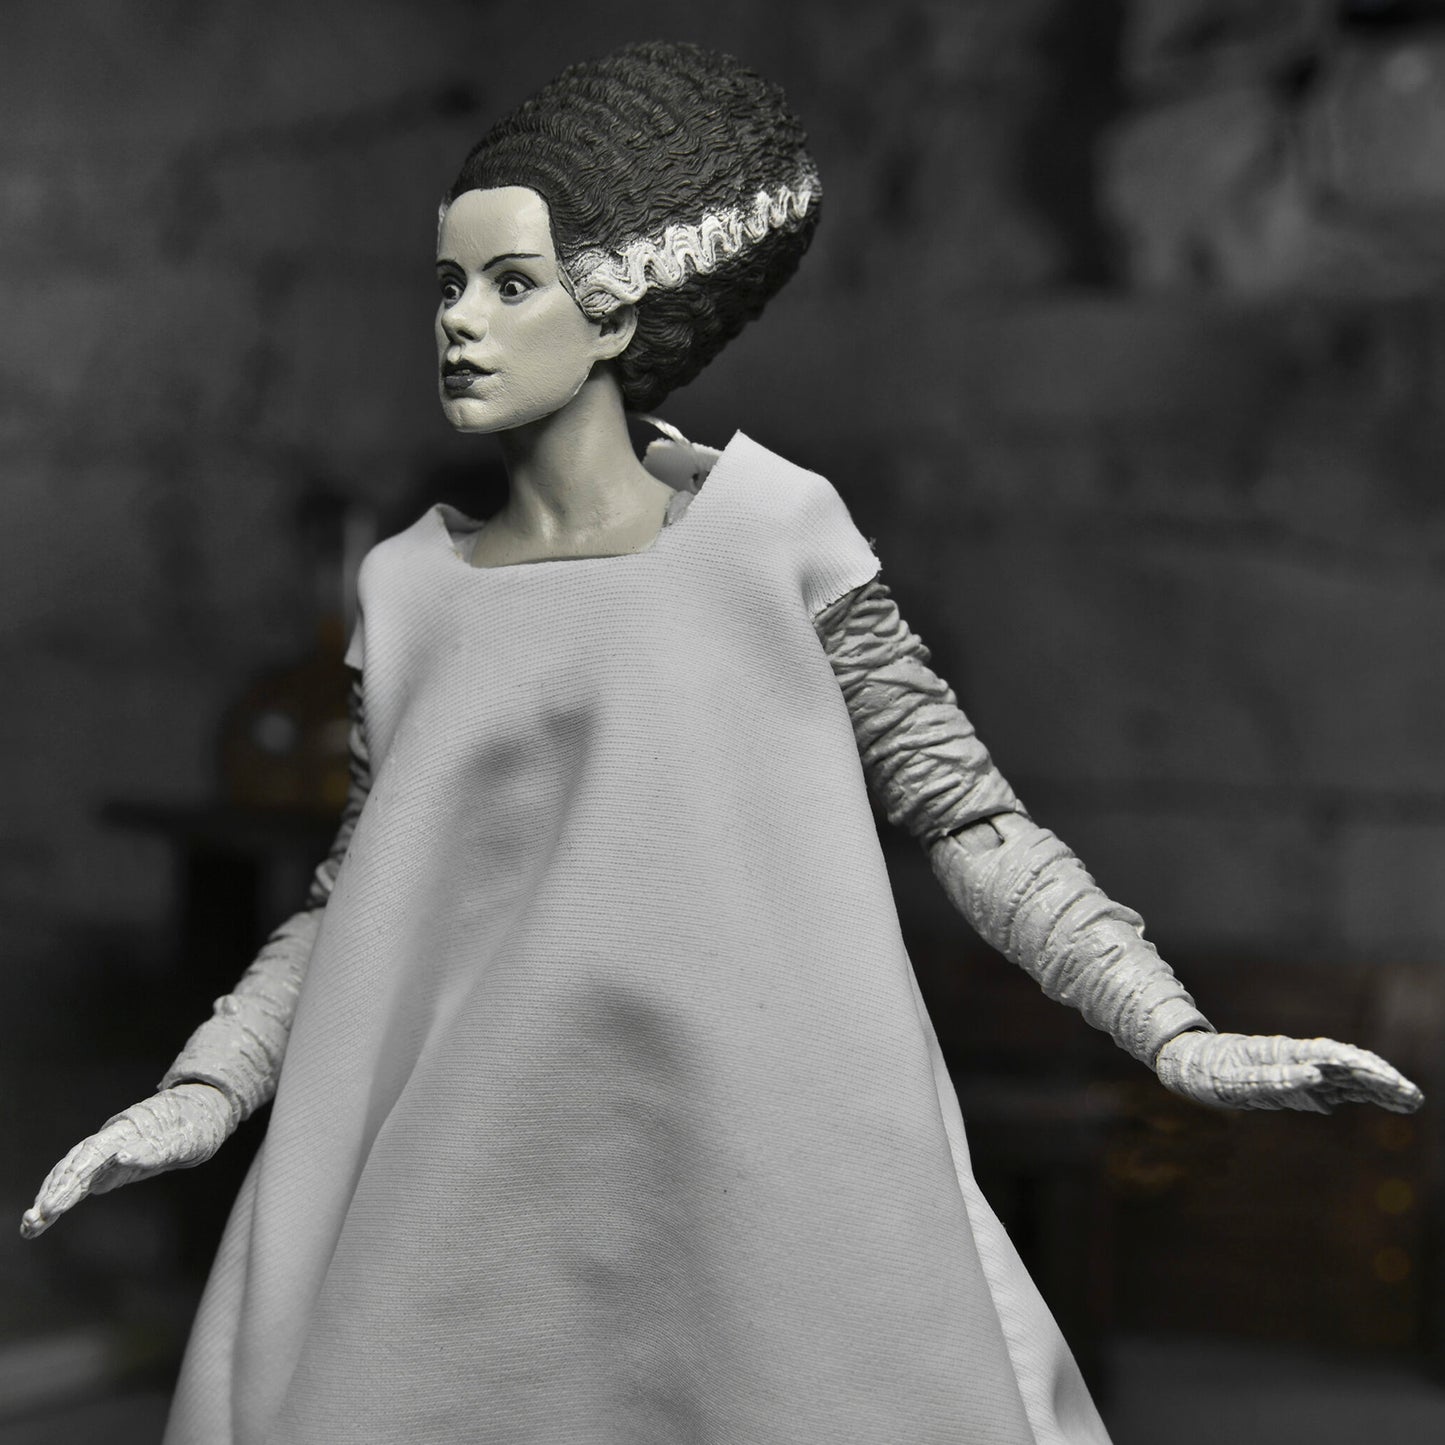 NECA: Universal Monsters - Ultimate Bride of Frankenstein (B&W) 7" Tall Action Figure